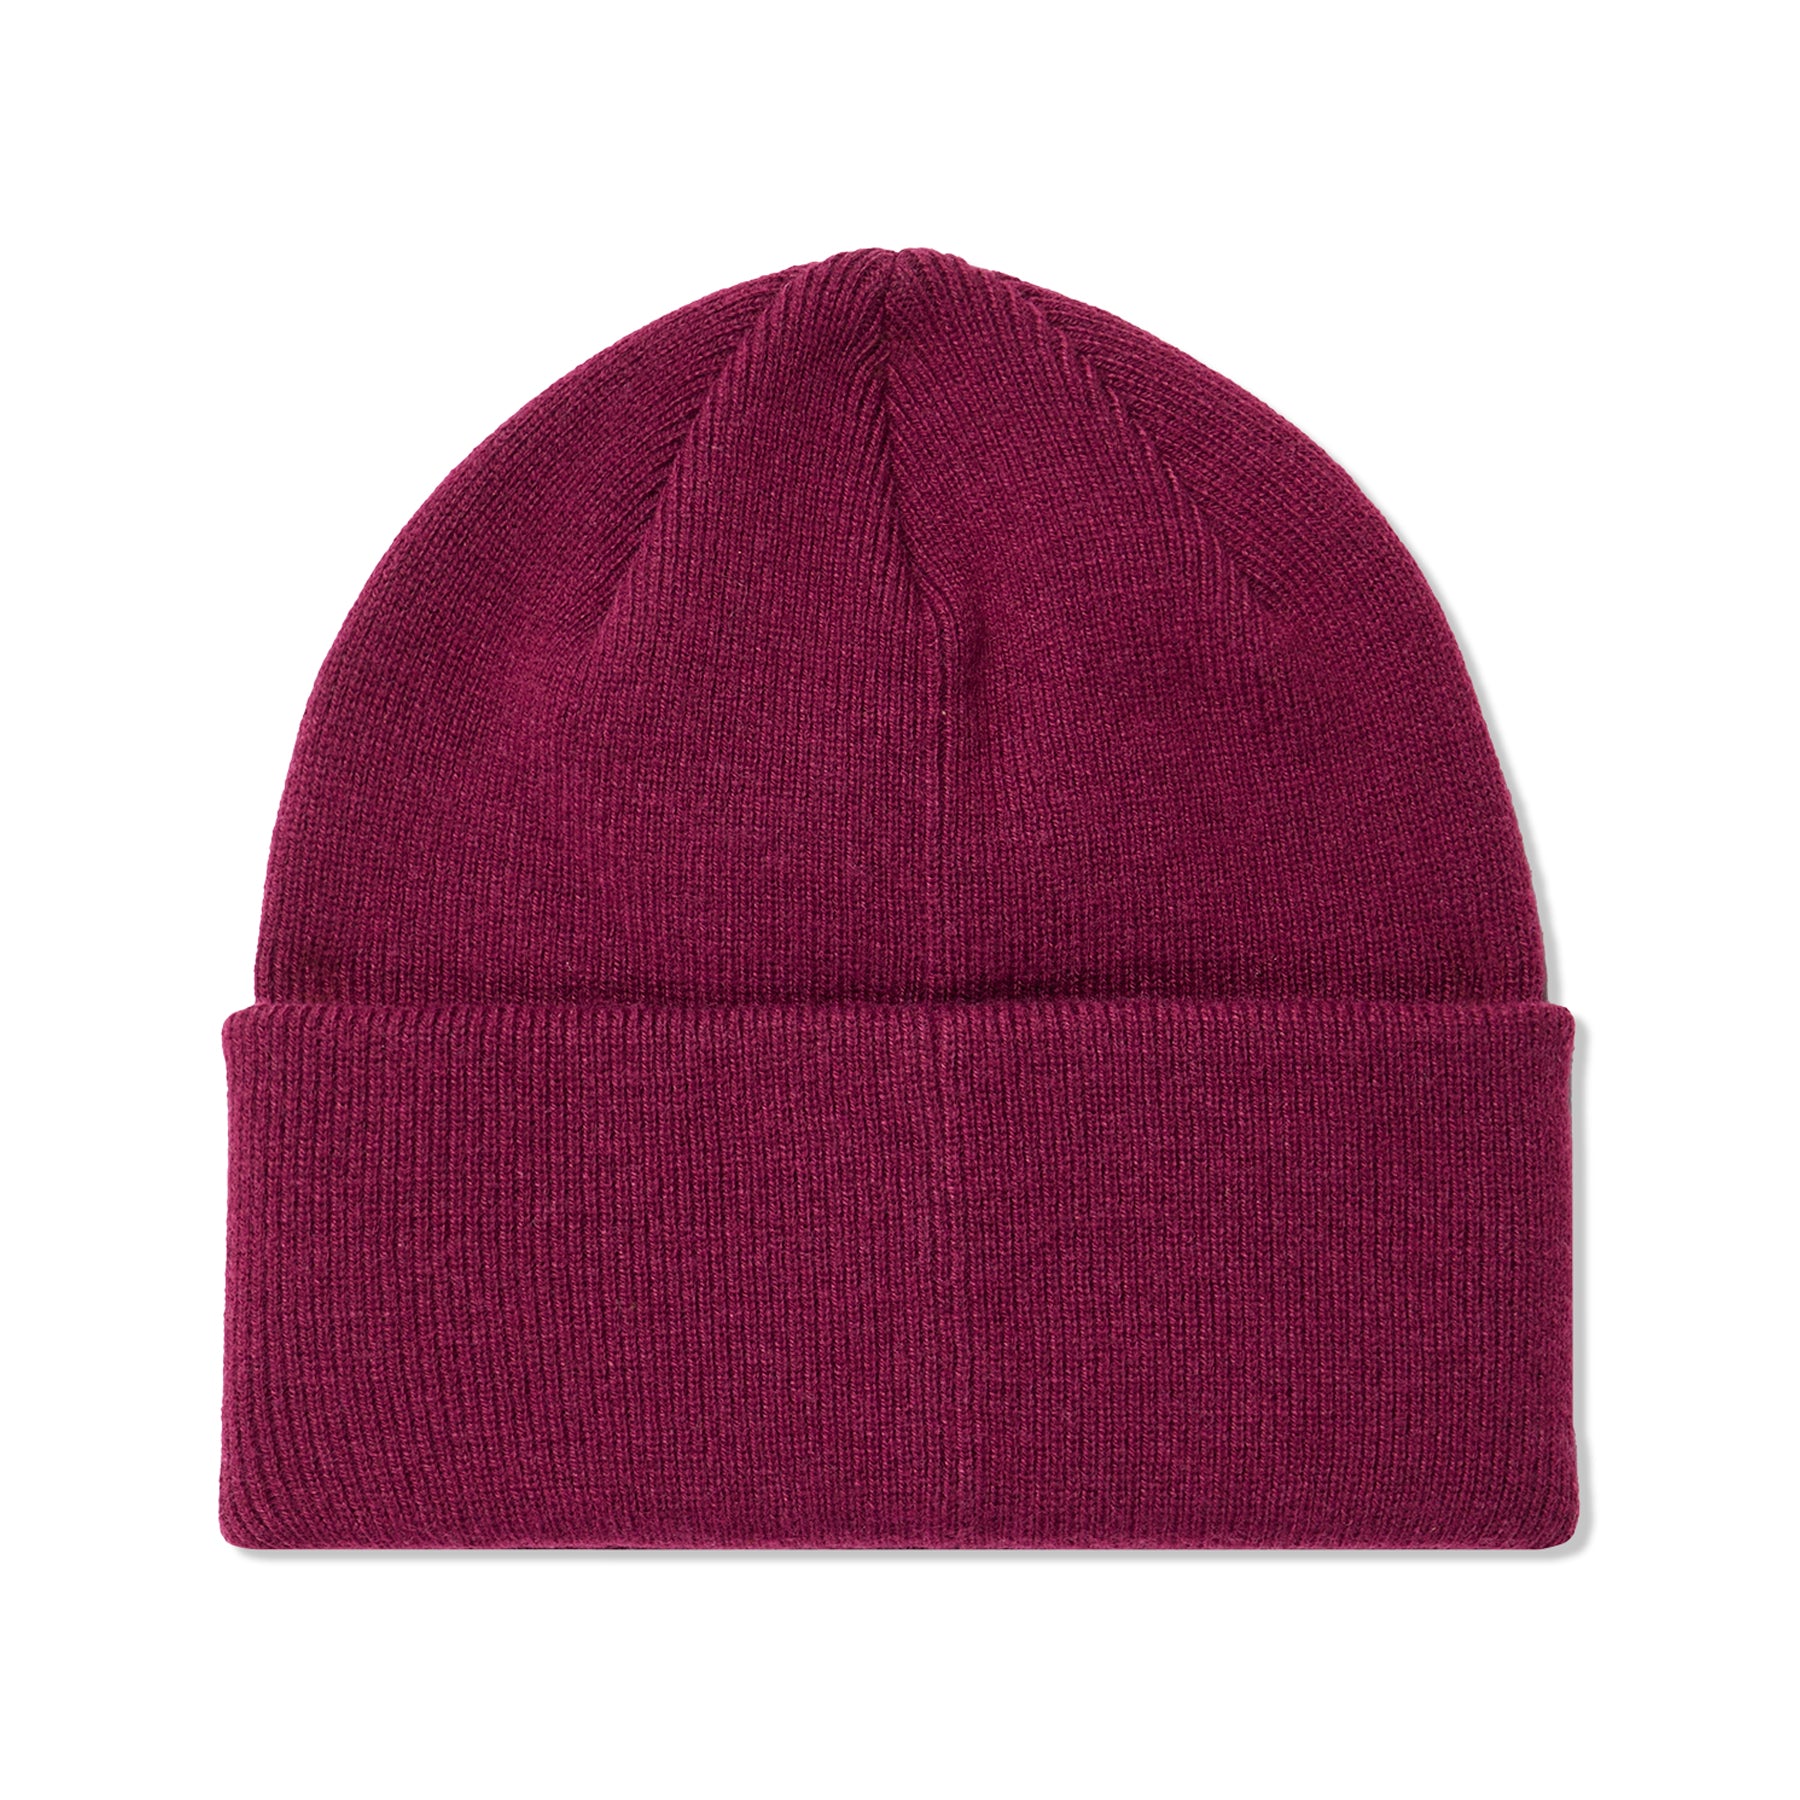 Beanie – Embossed Face The Urban Concepts North Boysenberry)